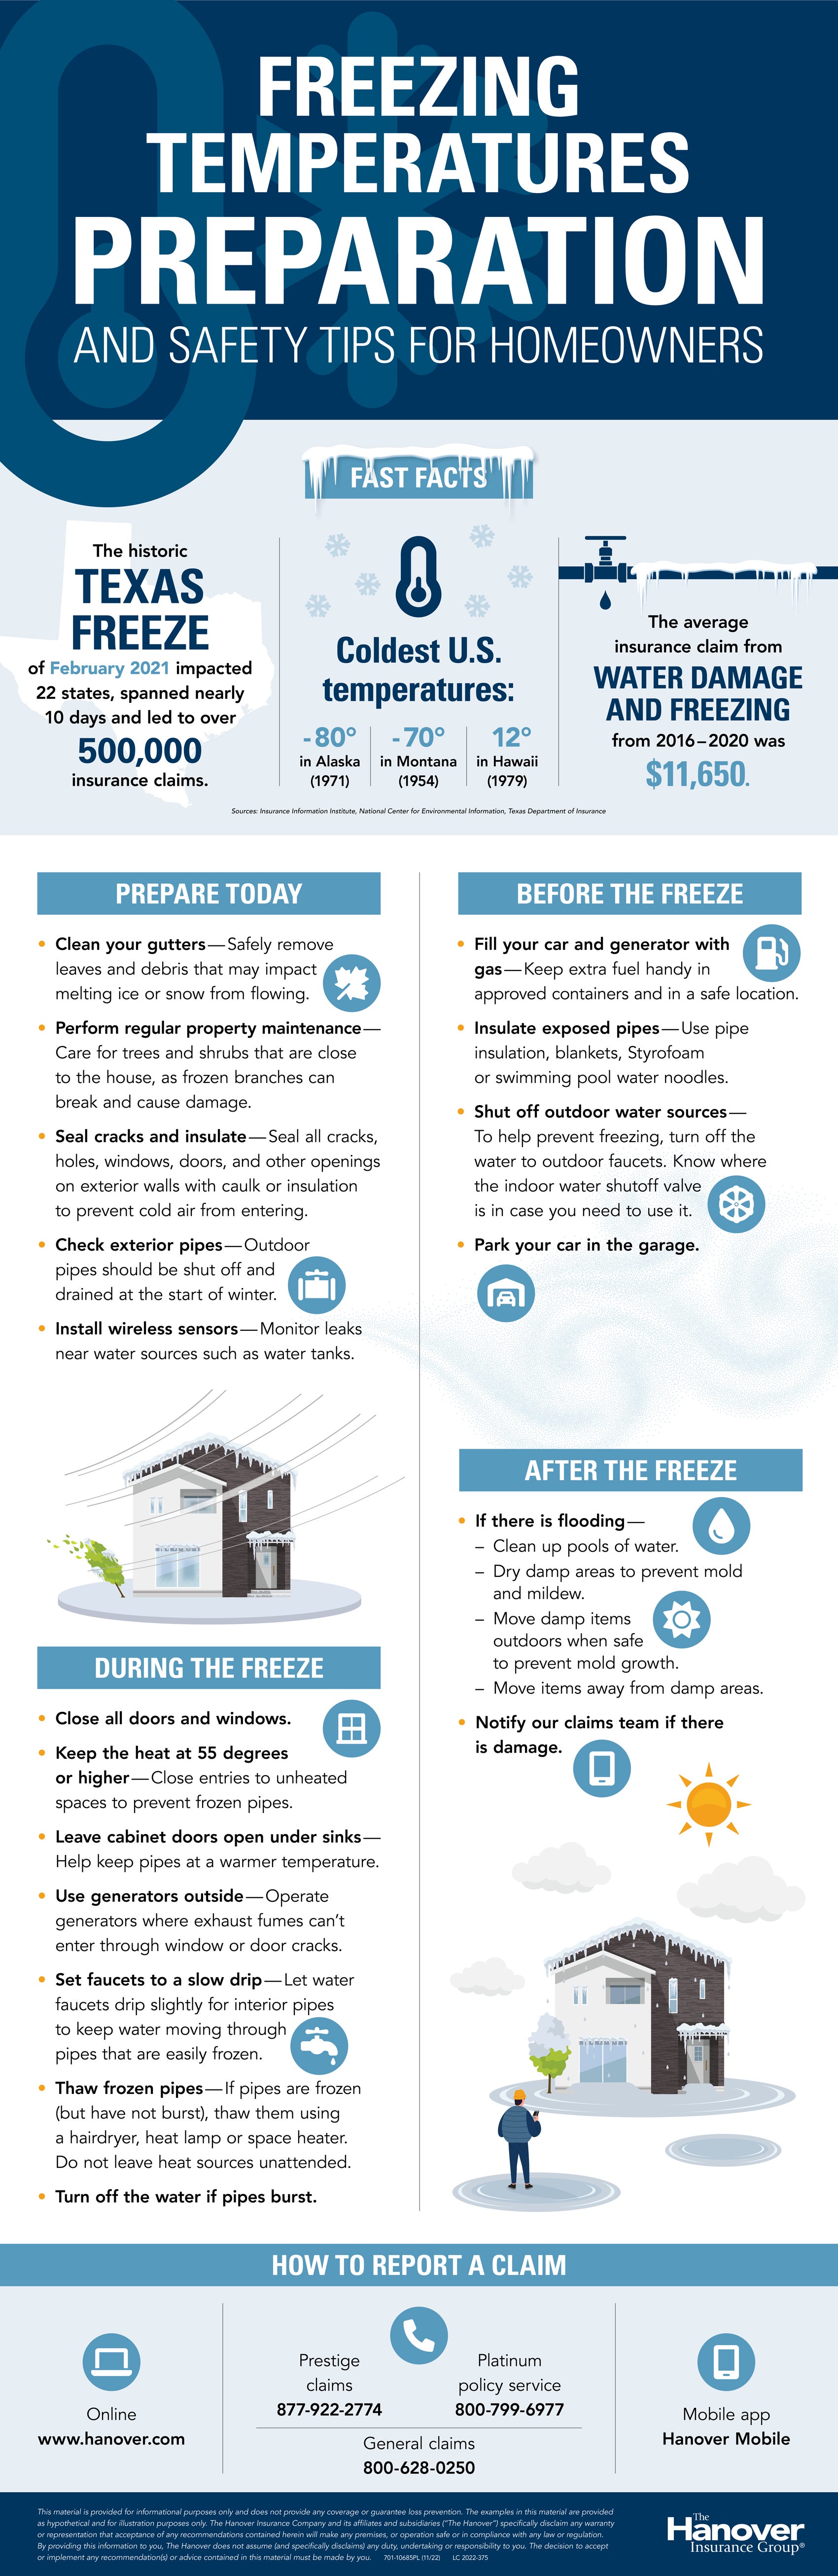 Infographic with homeowner tips for what to do before, during and after freezing temperatures.